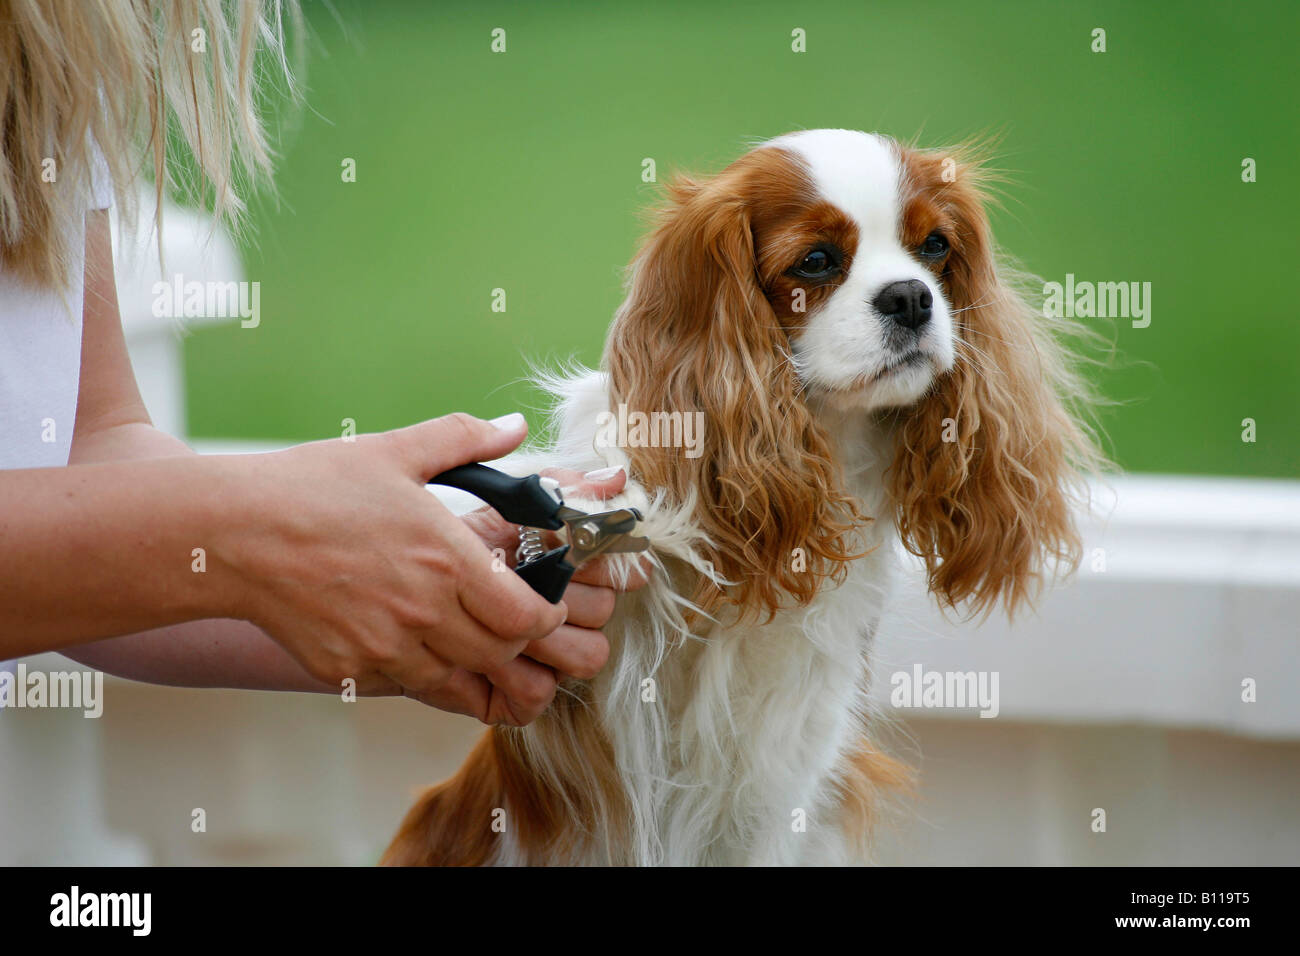 Woman clipping claws of Cavalier King Charles Spaniel blenheim Stock Photo